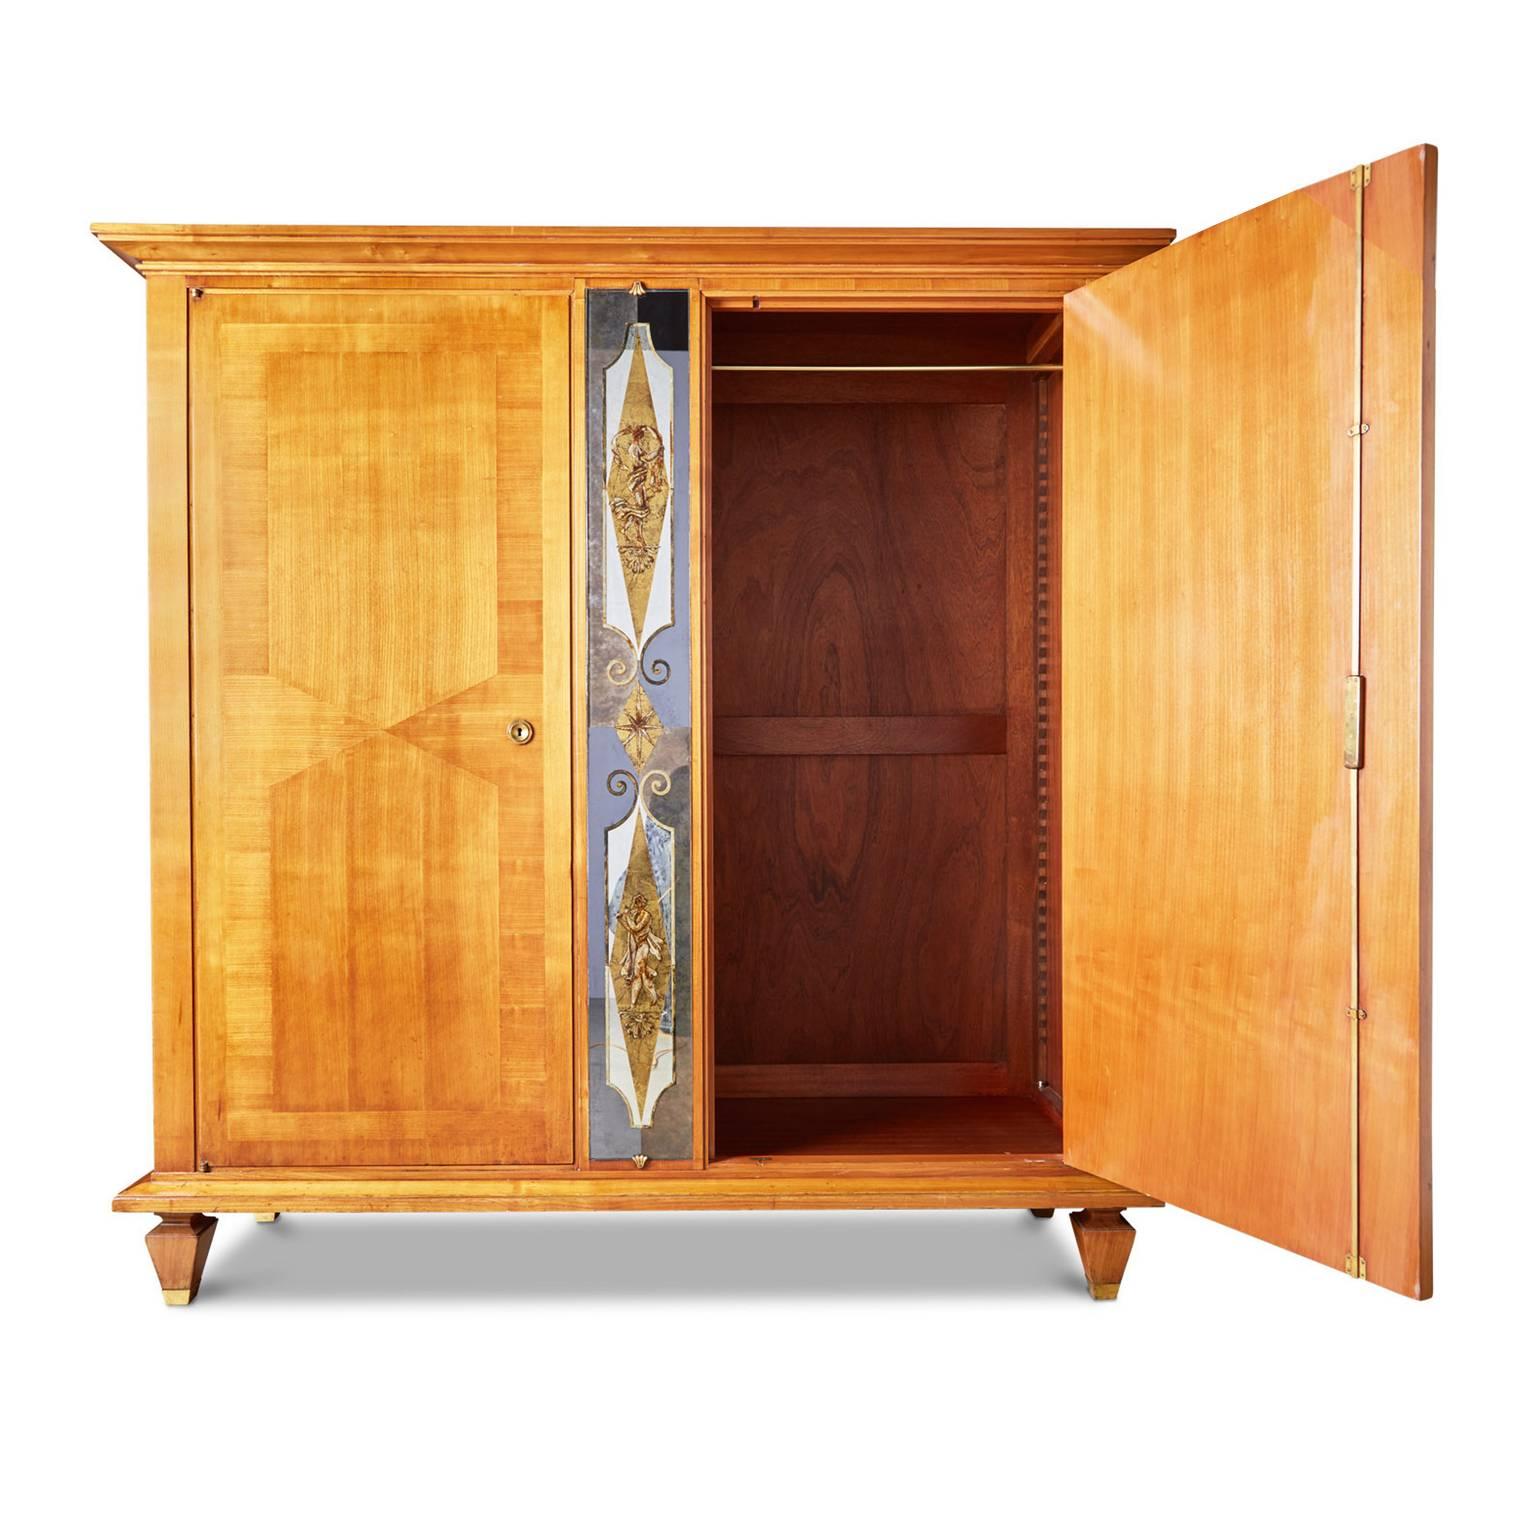 Spectacular Art Deco fruitwood armoire attributed to French designer and sculptor André Arbus. Featuring stunning gold leaf verre églomisé detail on the central panel which depicts classical figures surrounded by delicate borders and embellishments.